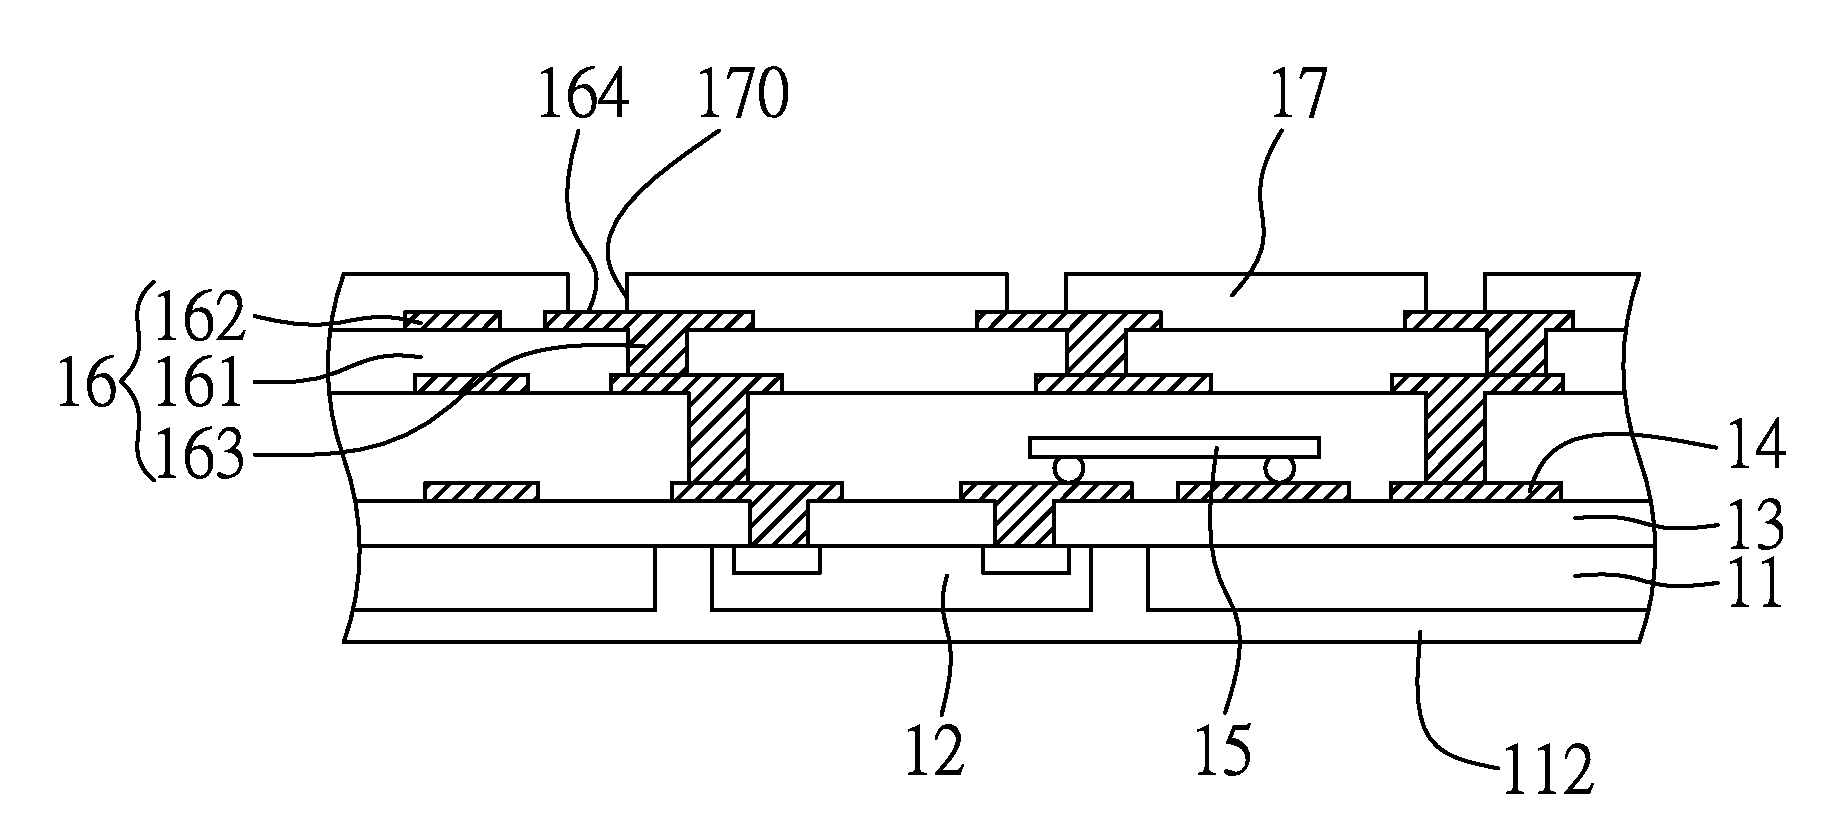 Circuit Board Assembly Having Passive Component and Stack Structure Thereof